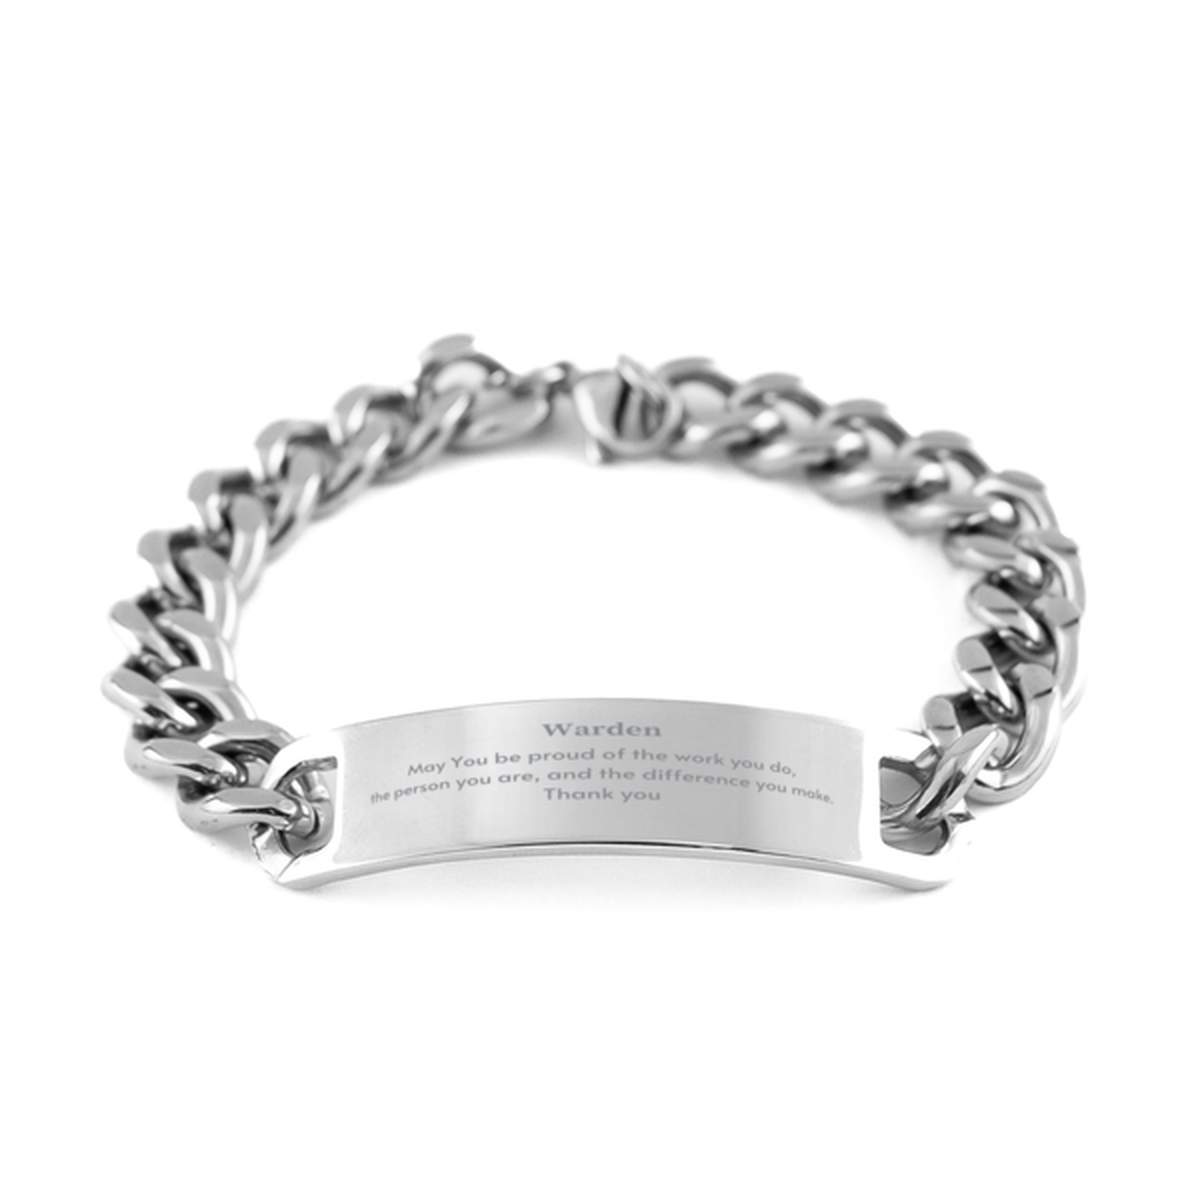 Heartwarming Cuban Chain Stainless Steel Bracelet Retirement Coworkers Gifts for Warden, Warden May You be proud of the work you do, the person you are Gifts for Boss Men Women Friends